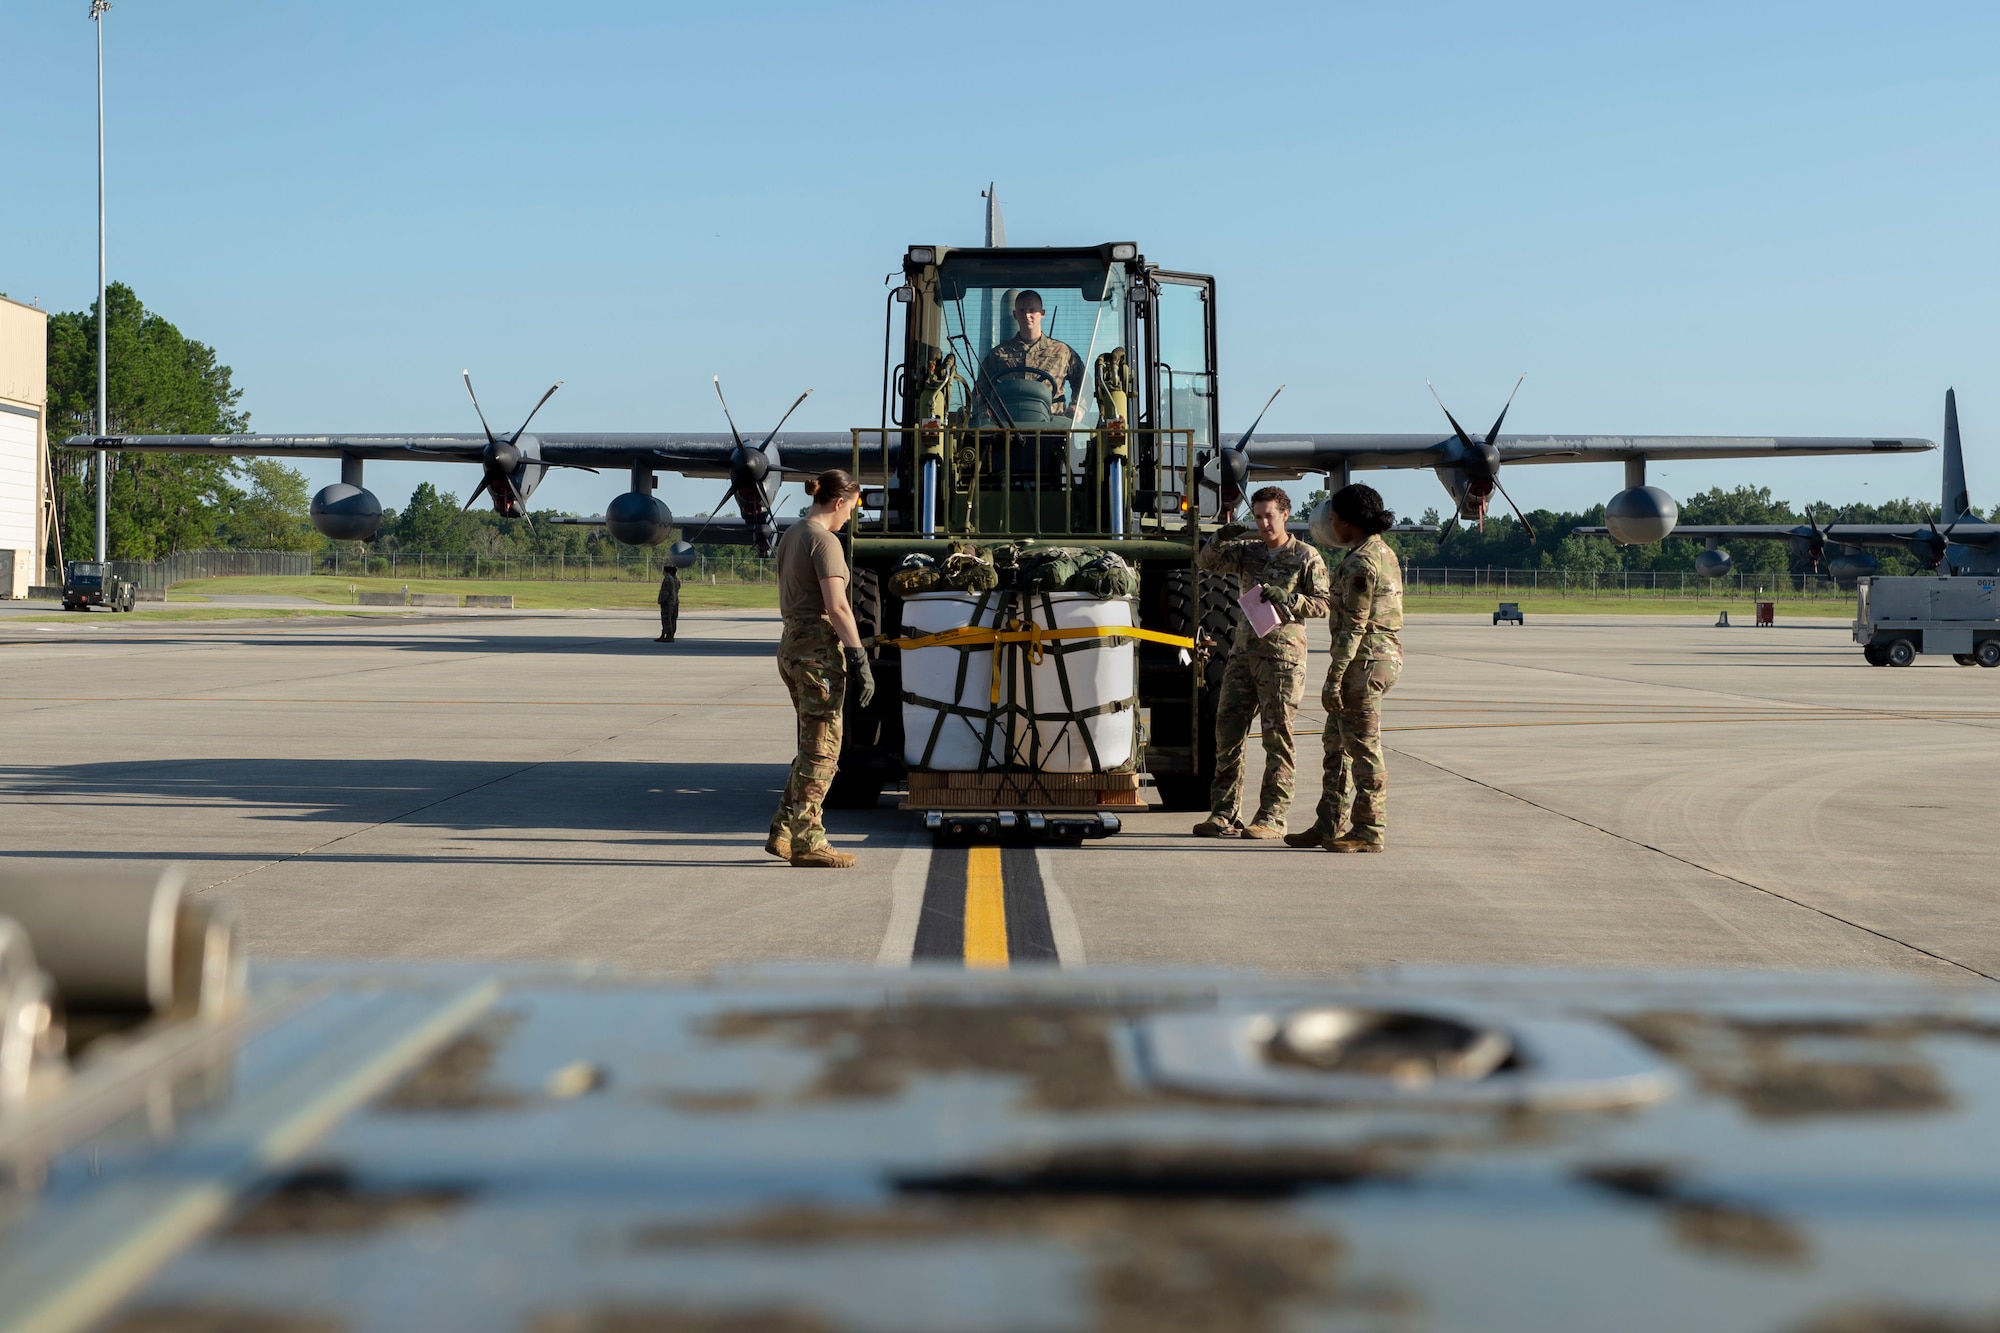 71st Rescue Squadron (RQS) loadmasters prepare to load a container delivery system on to the ramp of an HC-130J Combat King II before conducting the airframe’s first flight to be operated by an all-female aircrew Sept. 6, 2019, at Moody Air Force Base, Ga. The 71st RQS provides rapidly deployable, expeditionary personnel recovery forces for contingency and crisis response operations worldwide. (U.S. Air Force photo by 2nd Lt. Kaylin P. Hankerson)